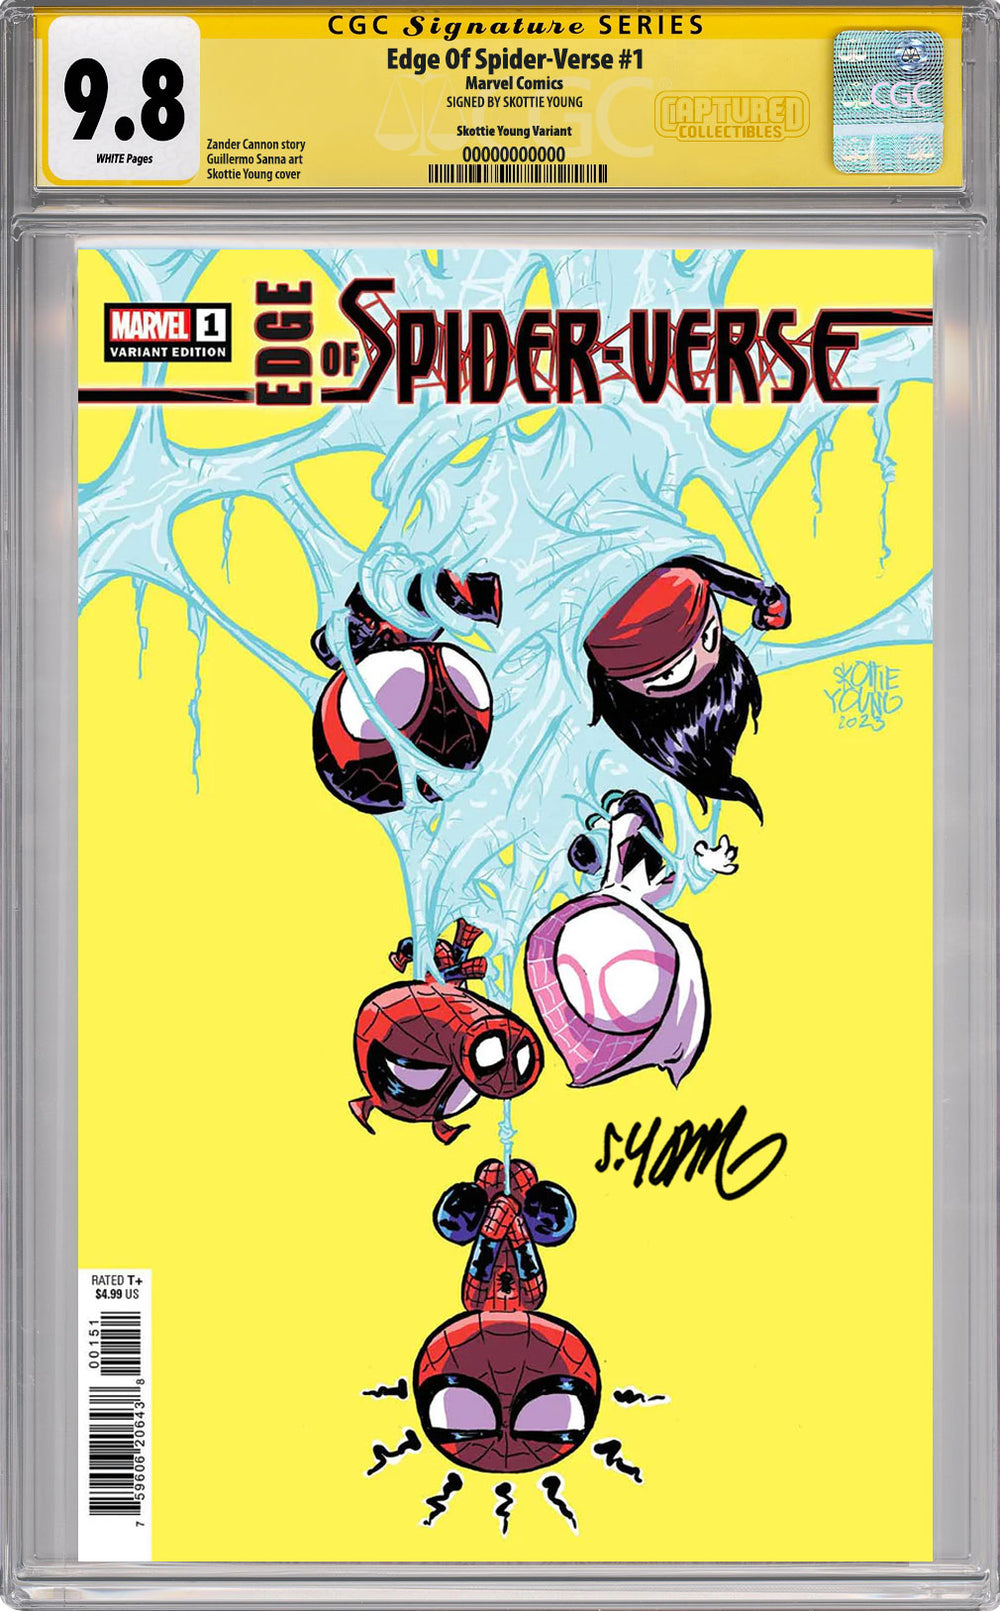 Edge of Spider-Verse #1 Variant CGC SS 9.8 Signed by Skottie Young